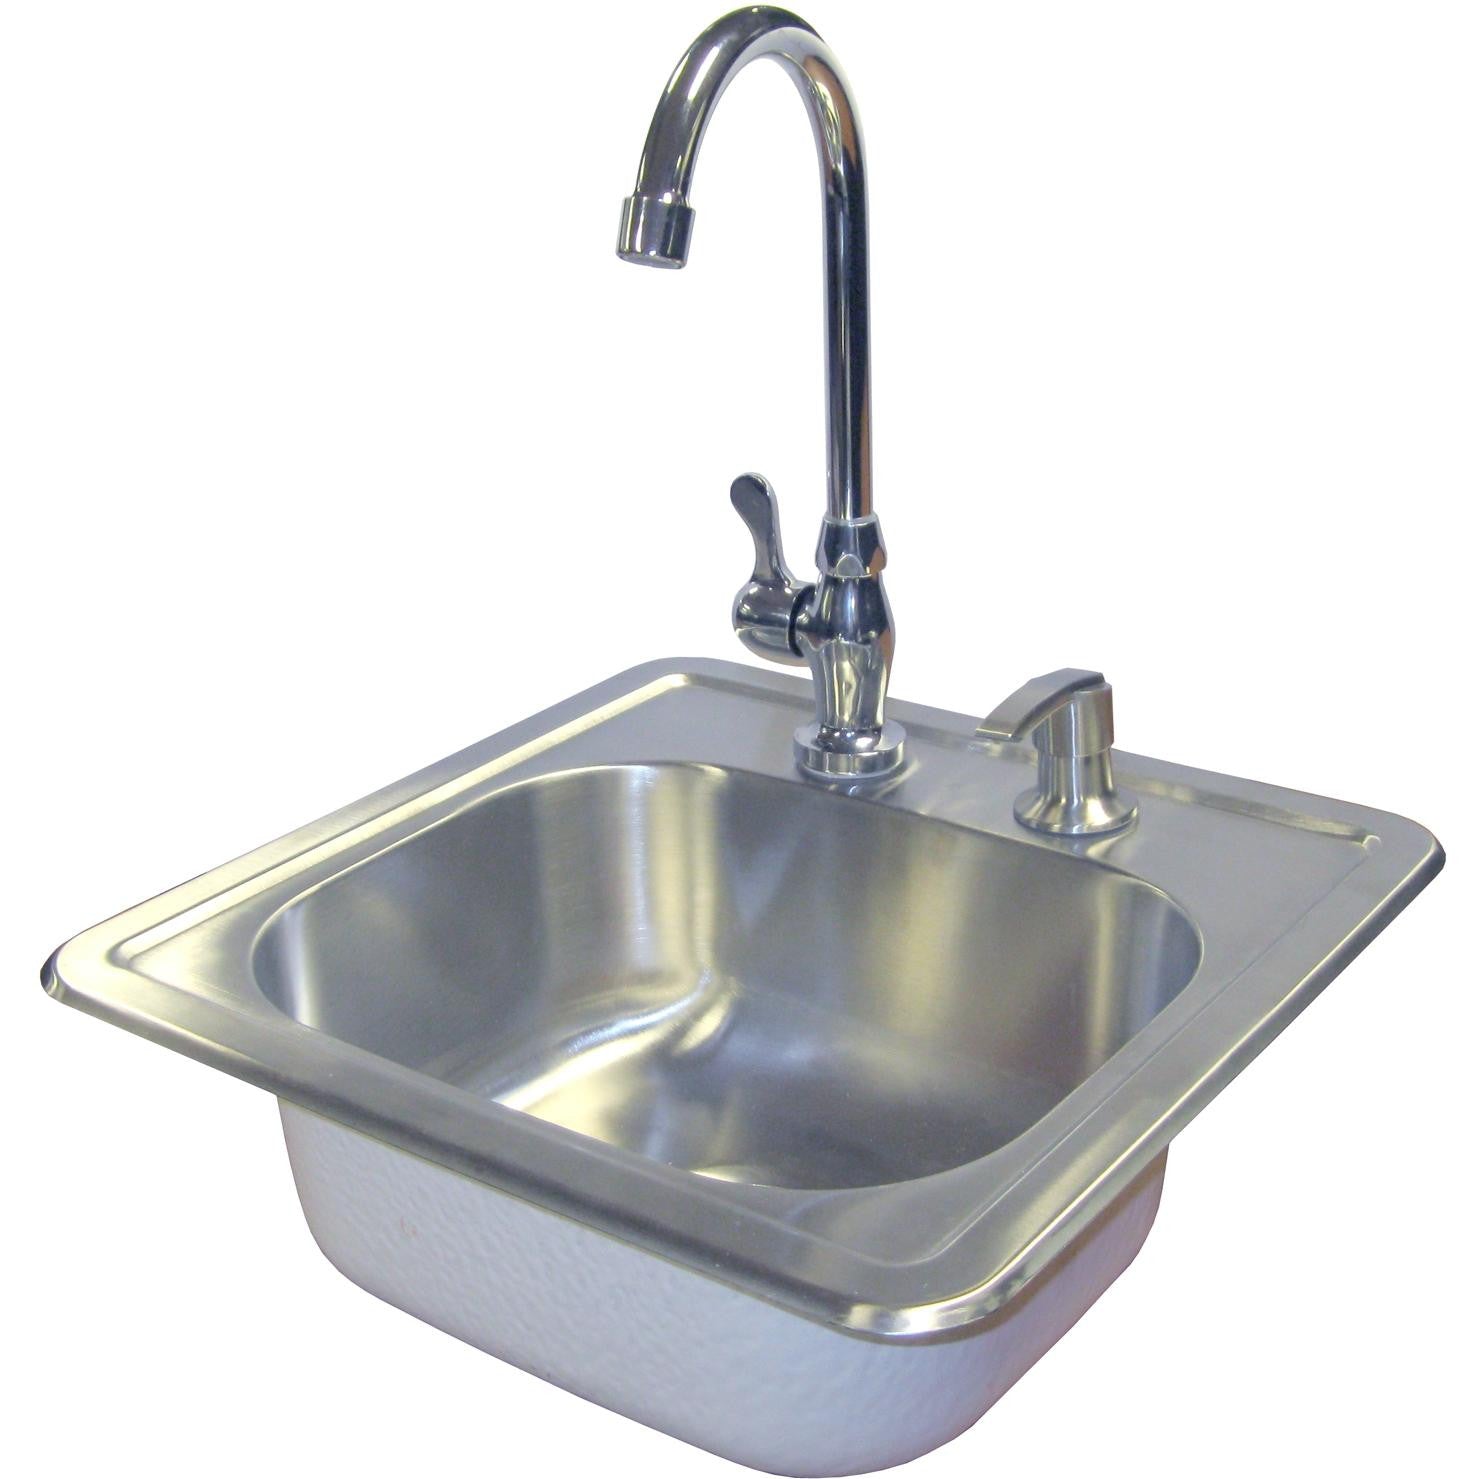 Cal FlameCal Flame Stainless Steel Sink with Faucet & Soap Dispenser BBQ11963 BBQ11963- BetterPatio.com